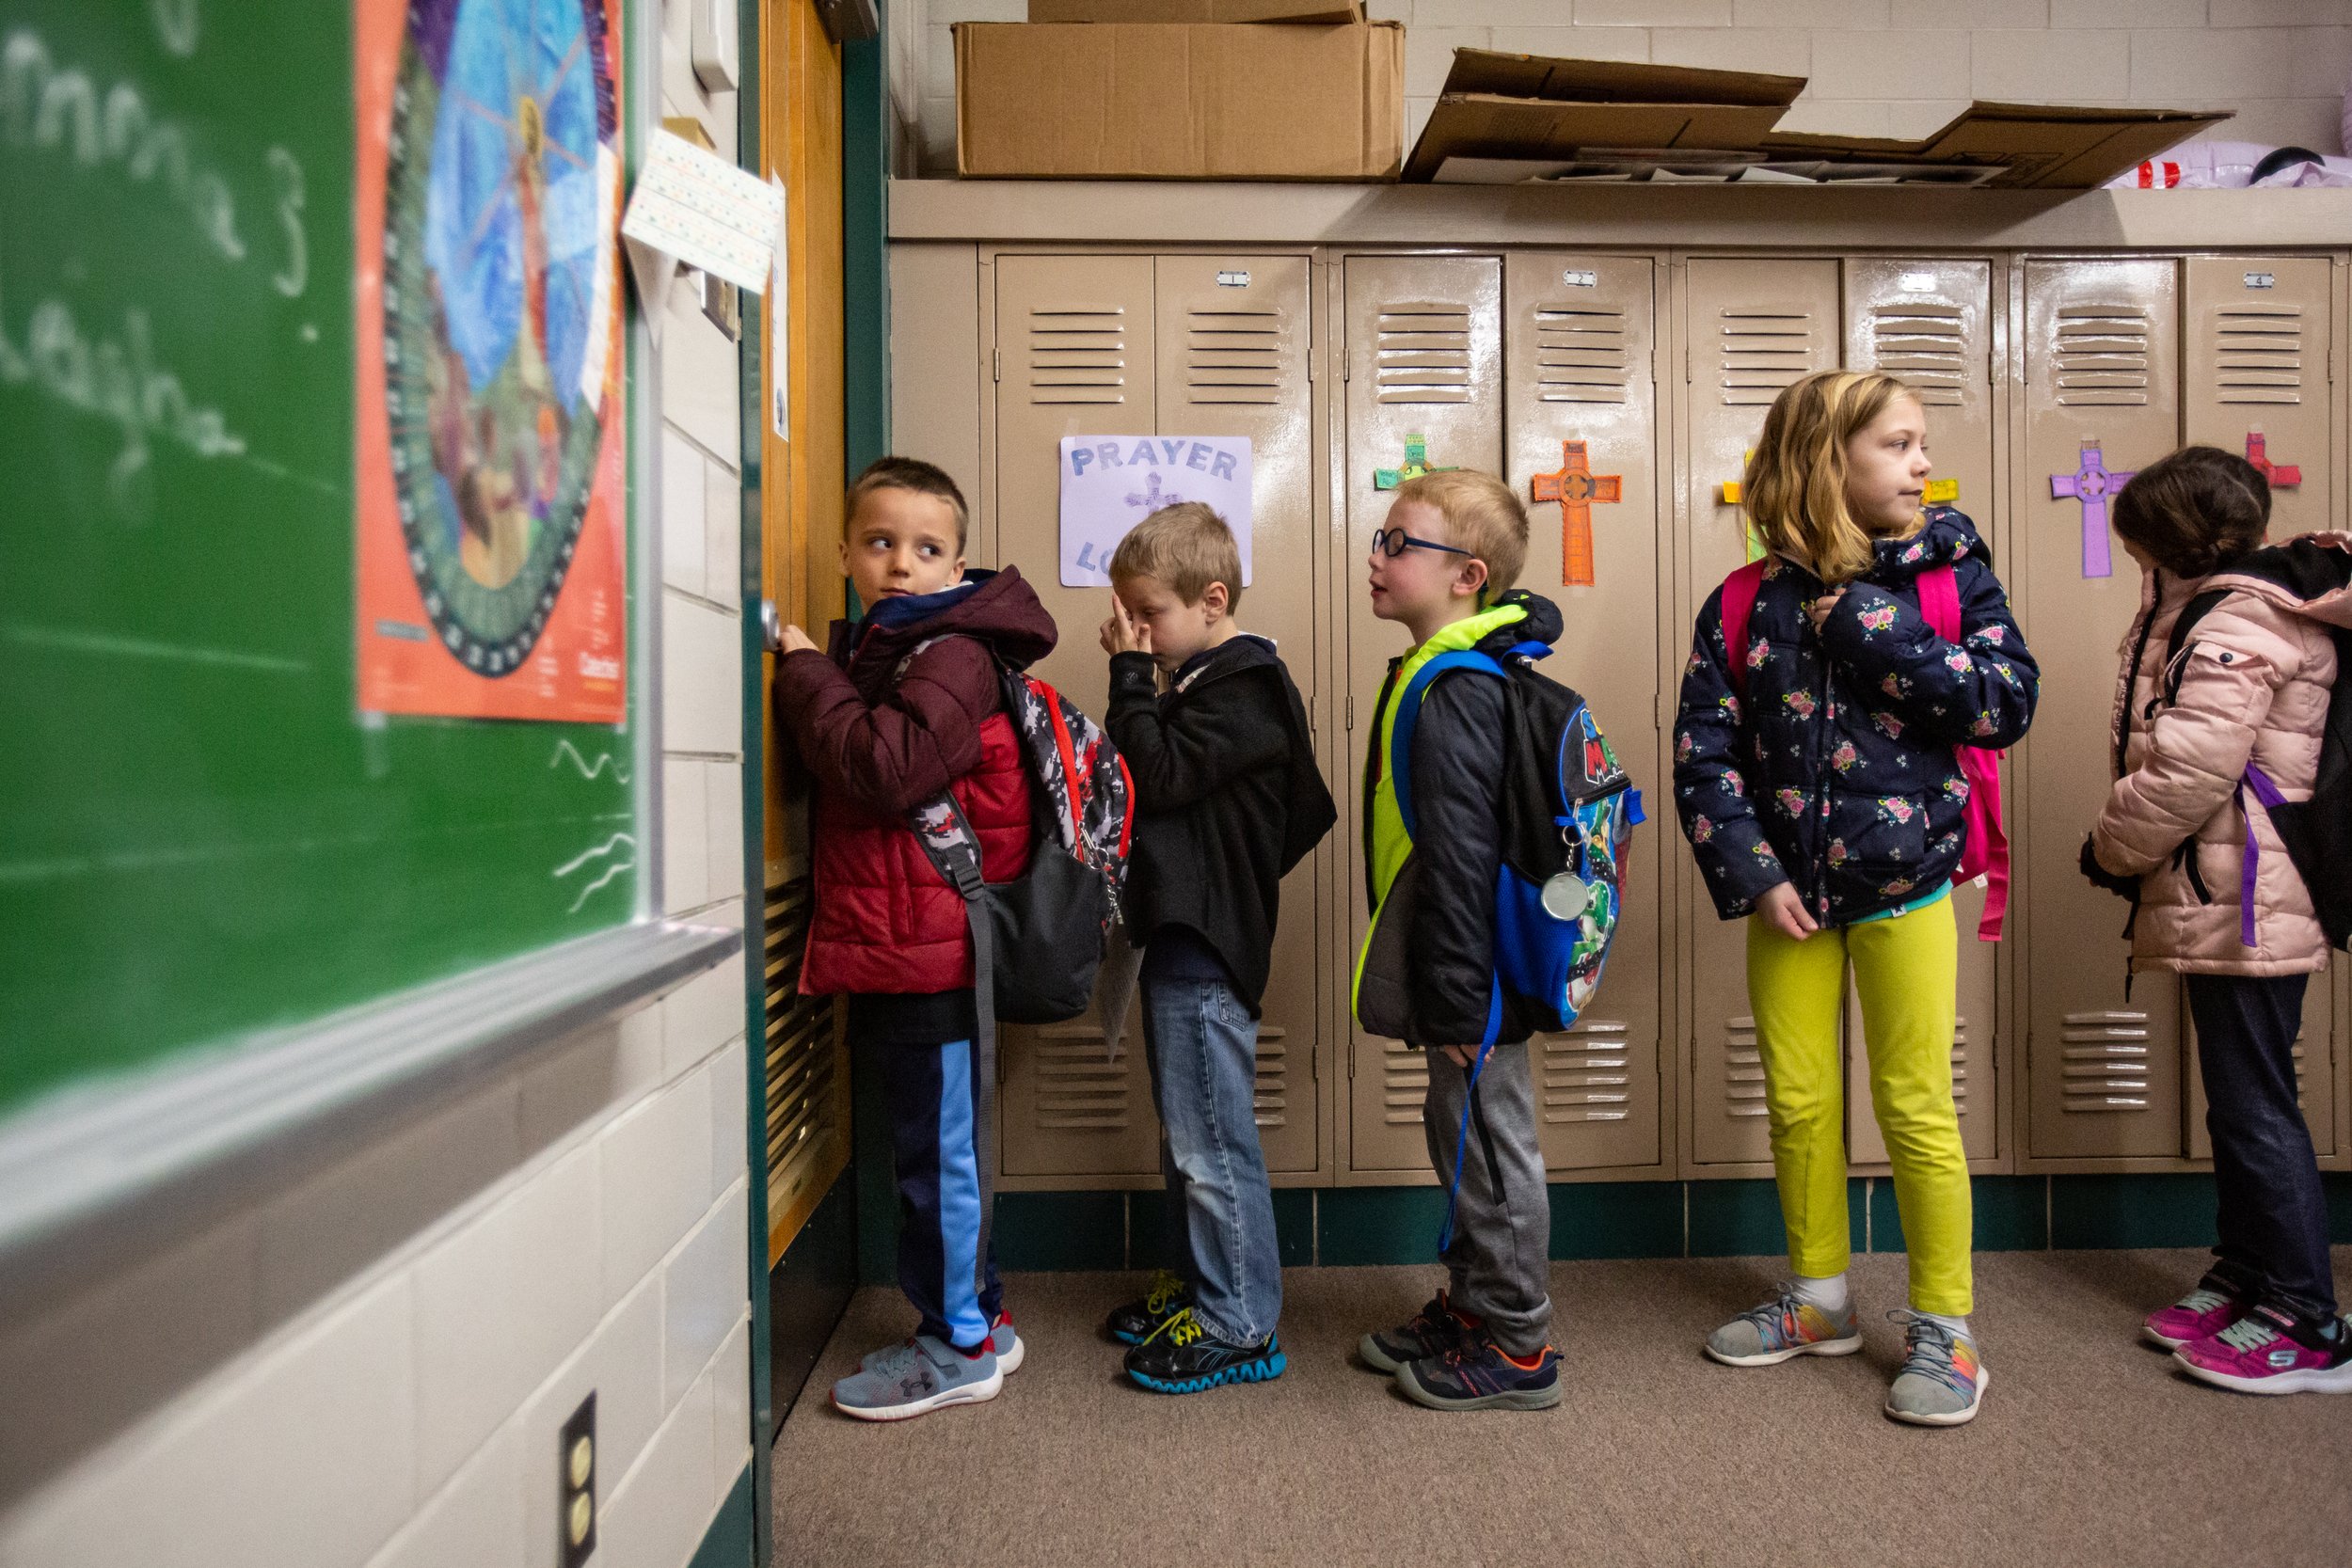  Kindergarteners Weston Rohleder, Henry Verkamp, Liam Cooper, Hallie Nordhoff and Briella Wahl wait in line to leave catechism class at St. Anthony of Padua Church and take the bus to Pine Ridge Elementary to start their school day on Wednesday, Feb.